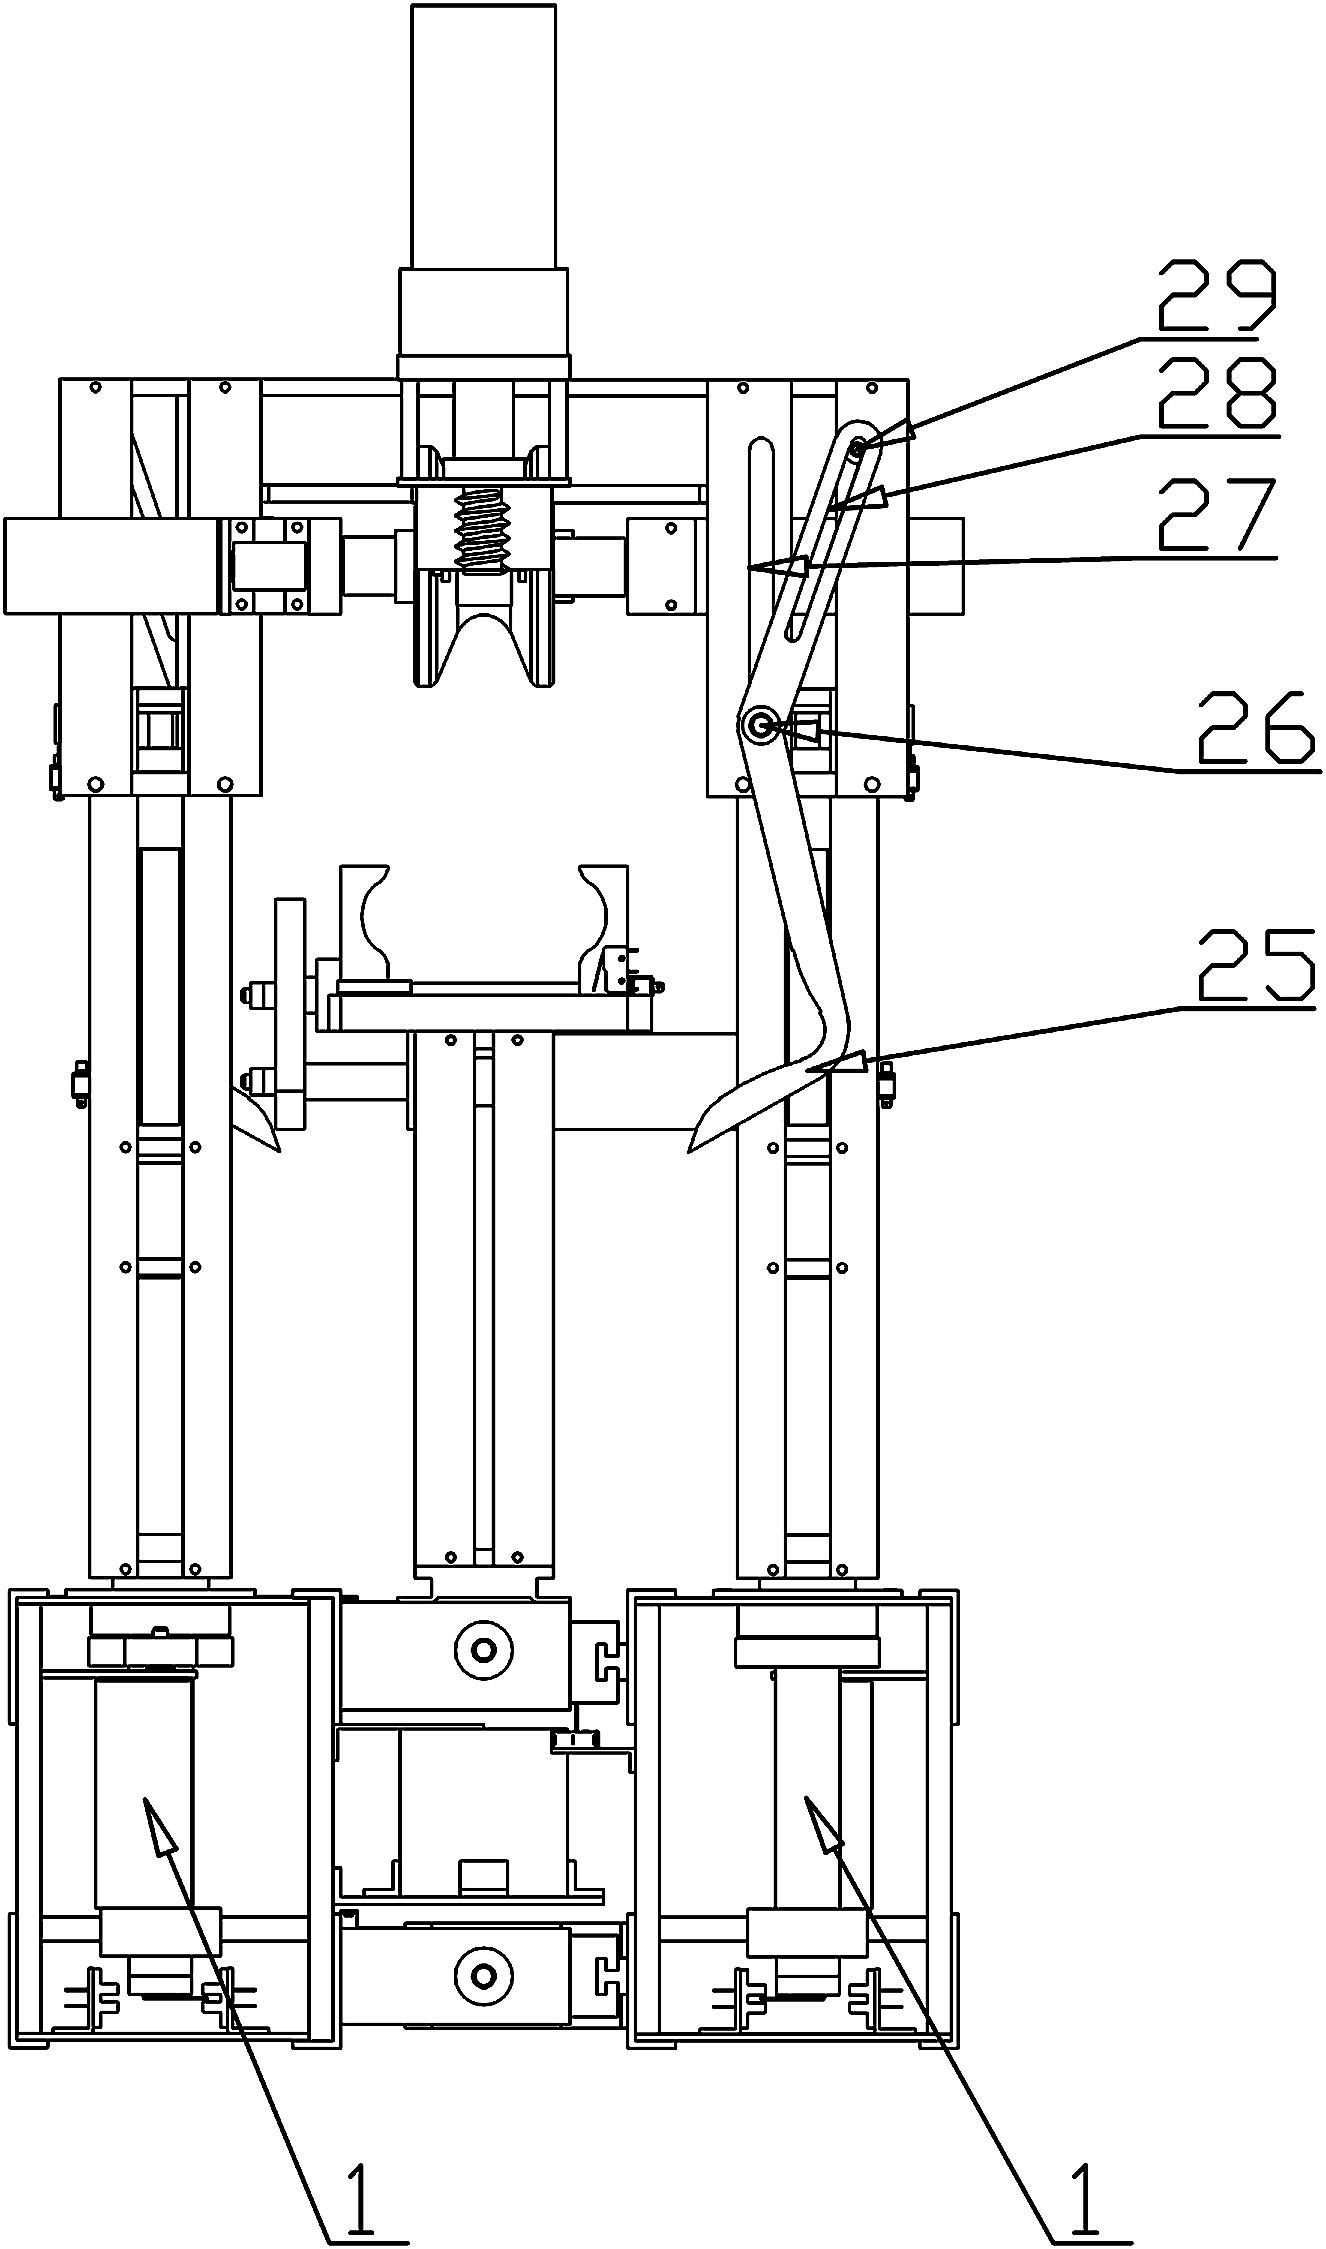 Robot for automatically deicing for power transmission line